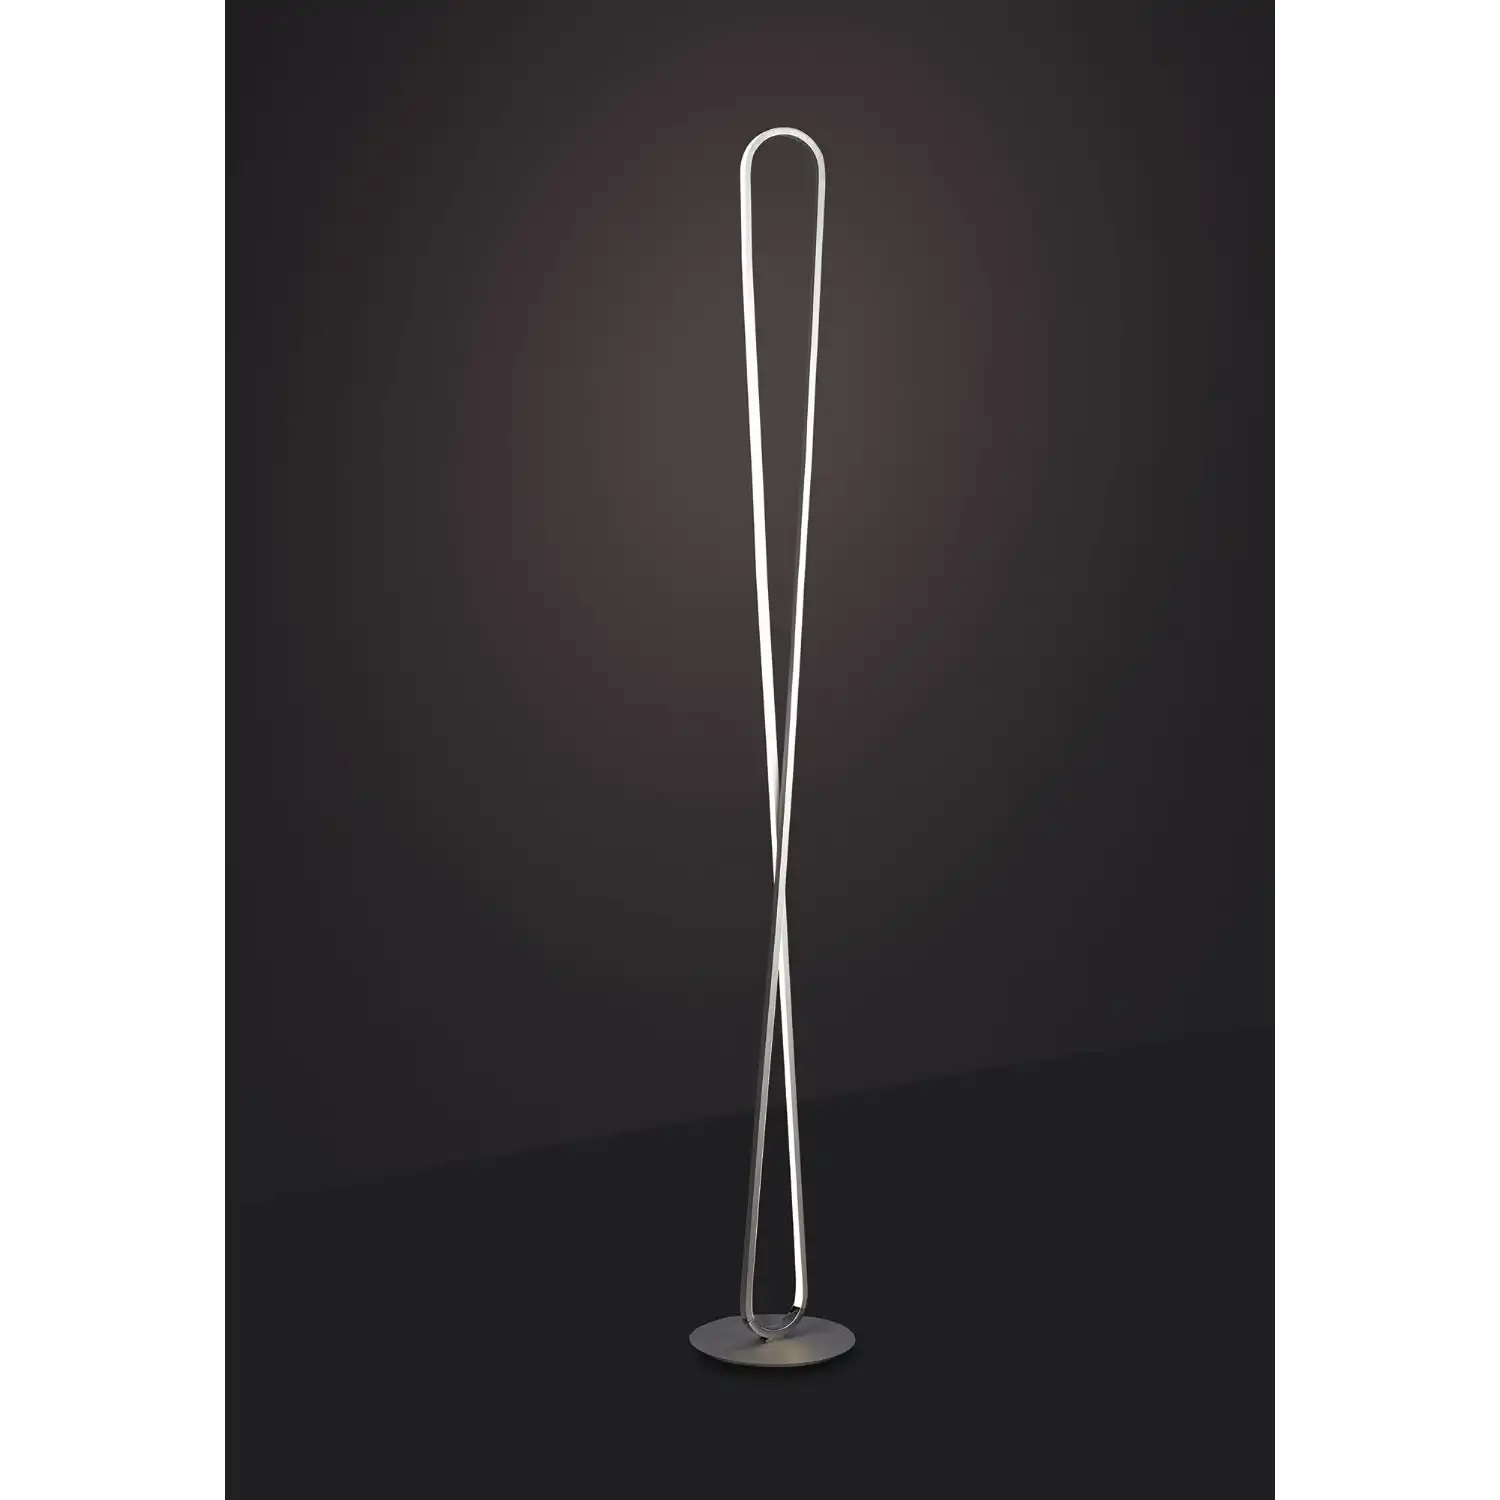 Bucle Floor Lamp 50W LED 3000K, 4300lm, Dimmable, Silver Polished Chrome Frosted Acrylic, 3yrs Warranty